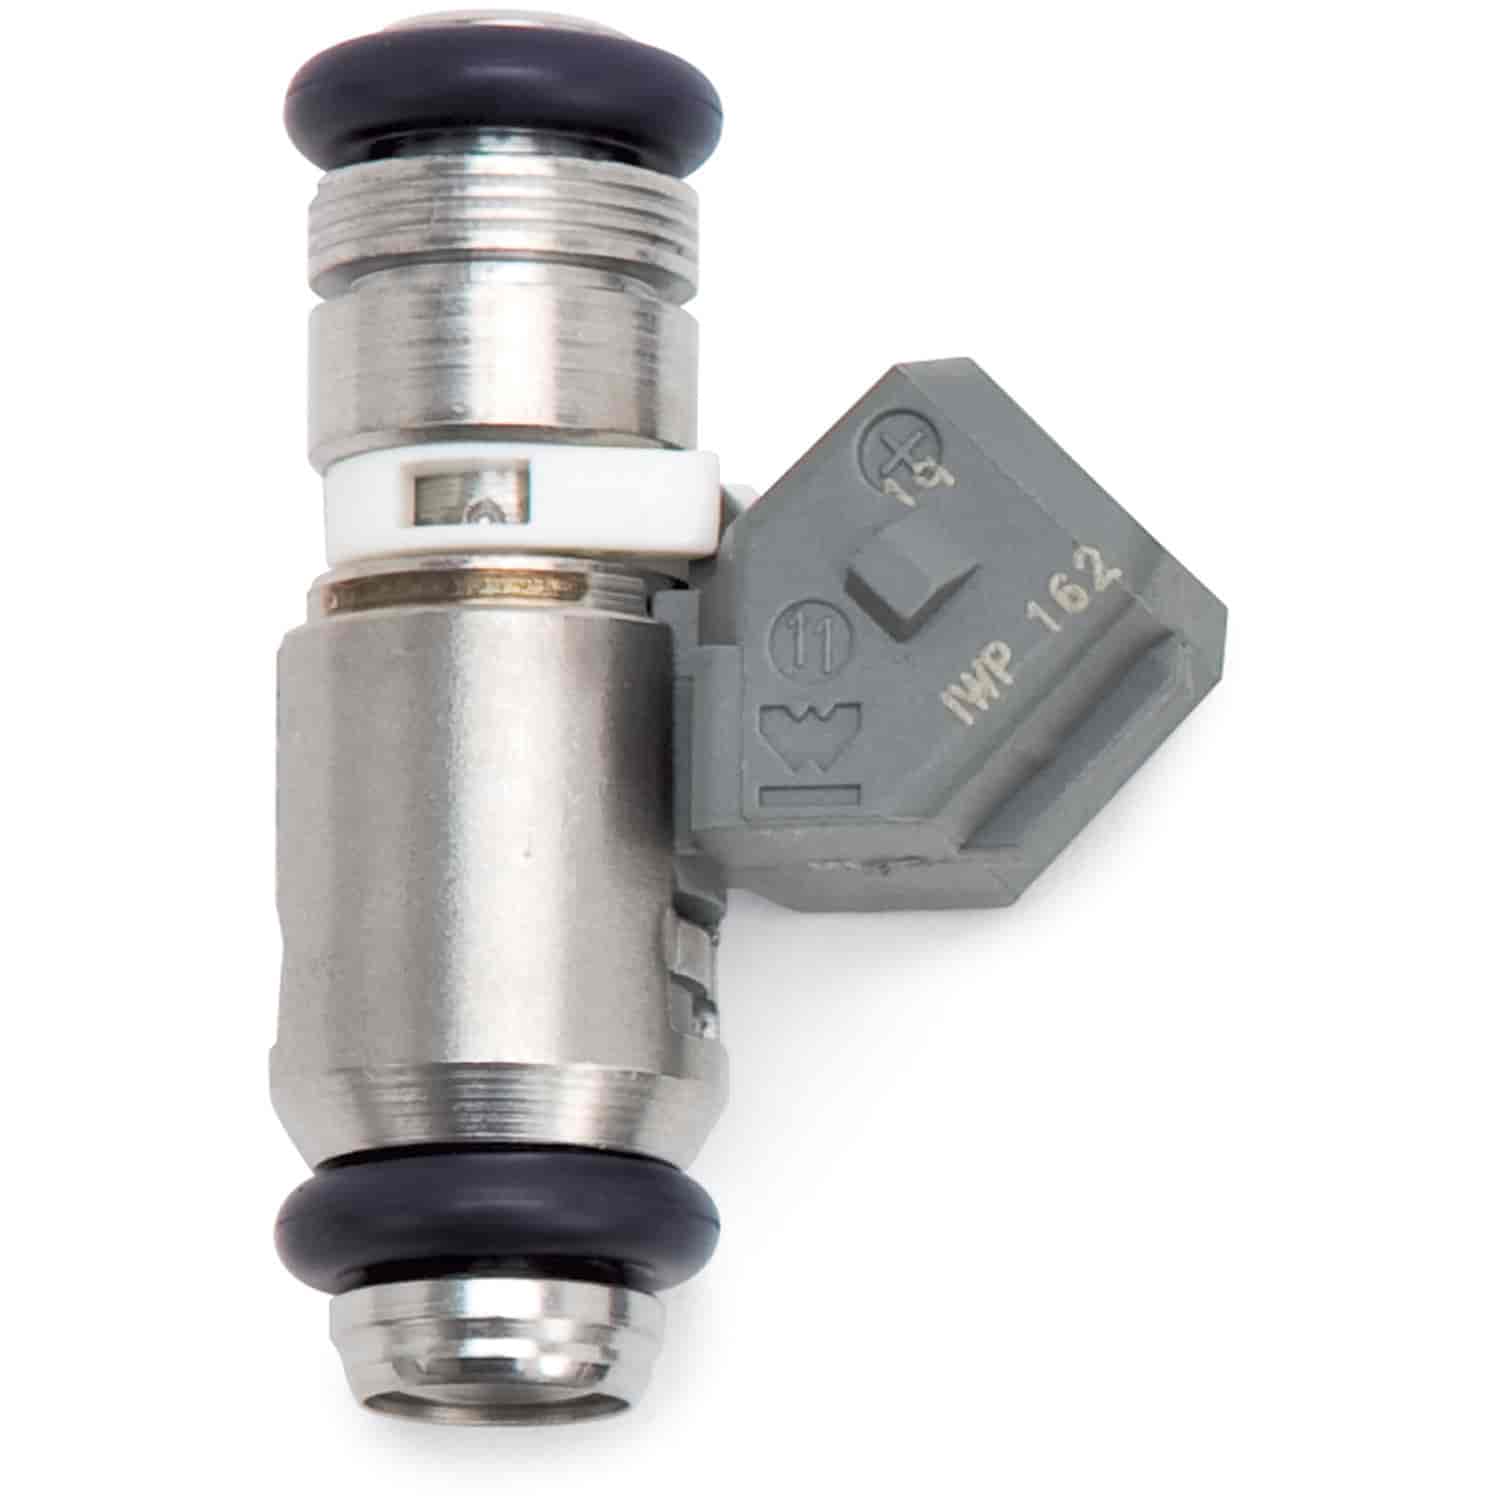 Pico Fuel Injector 29lbs/hour @ 45 psi